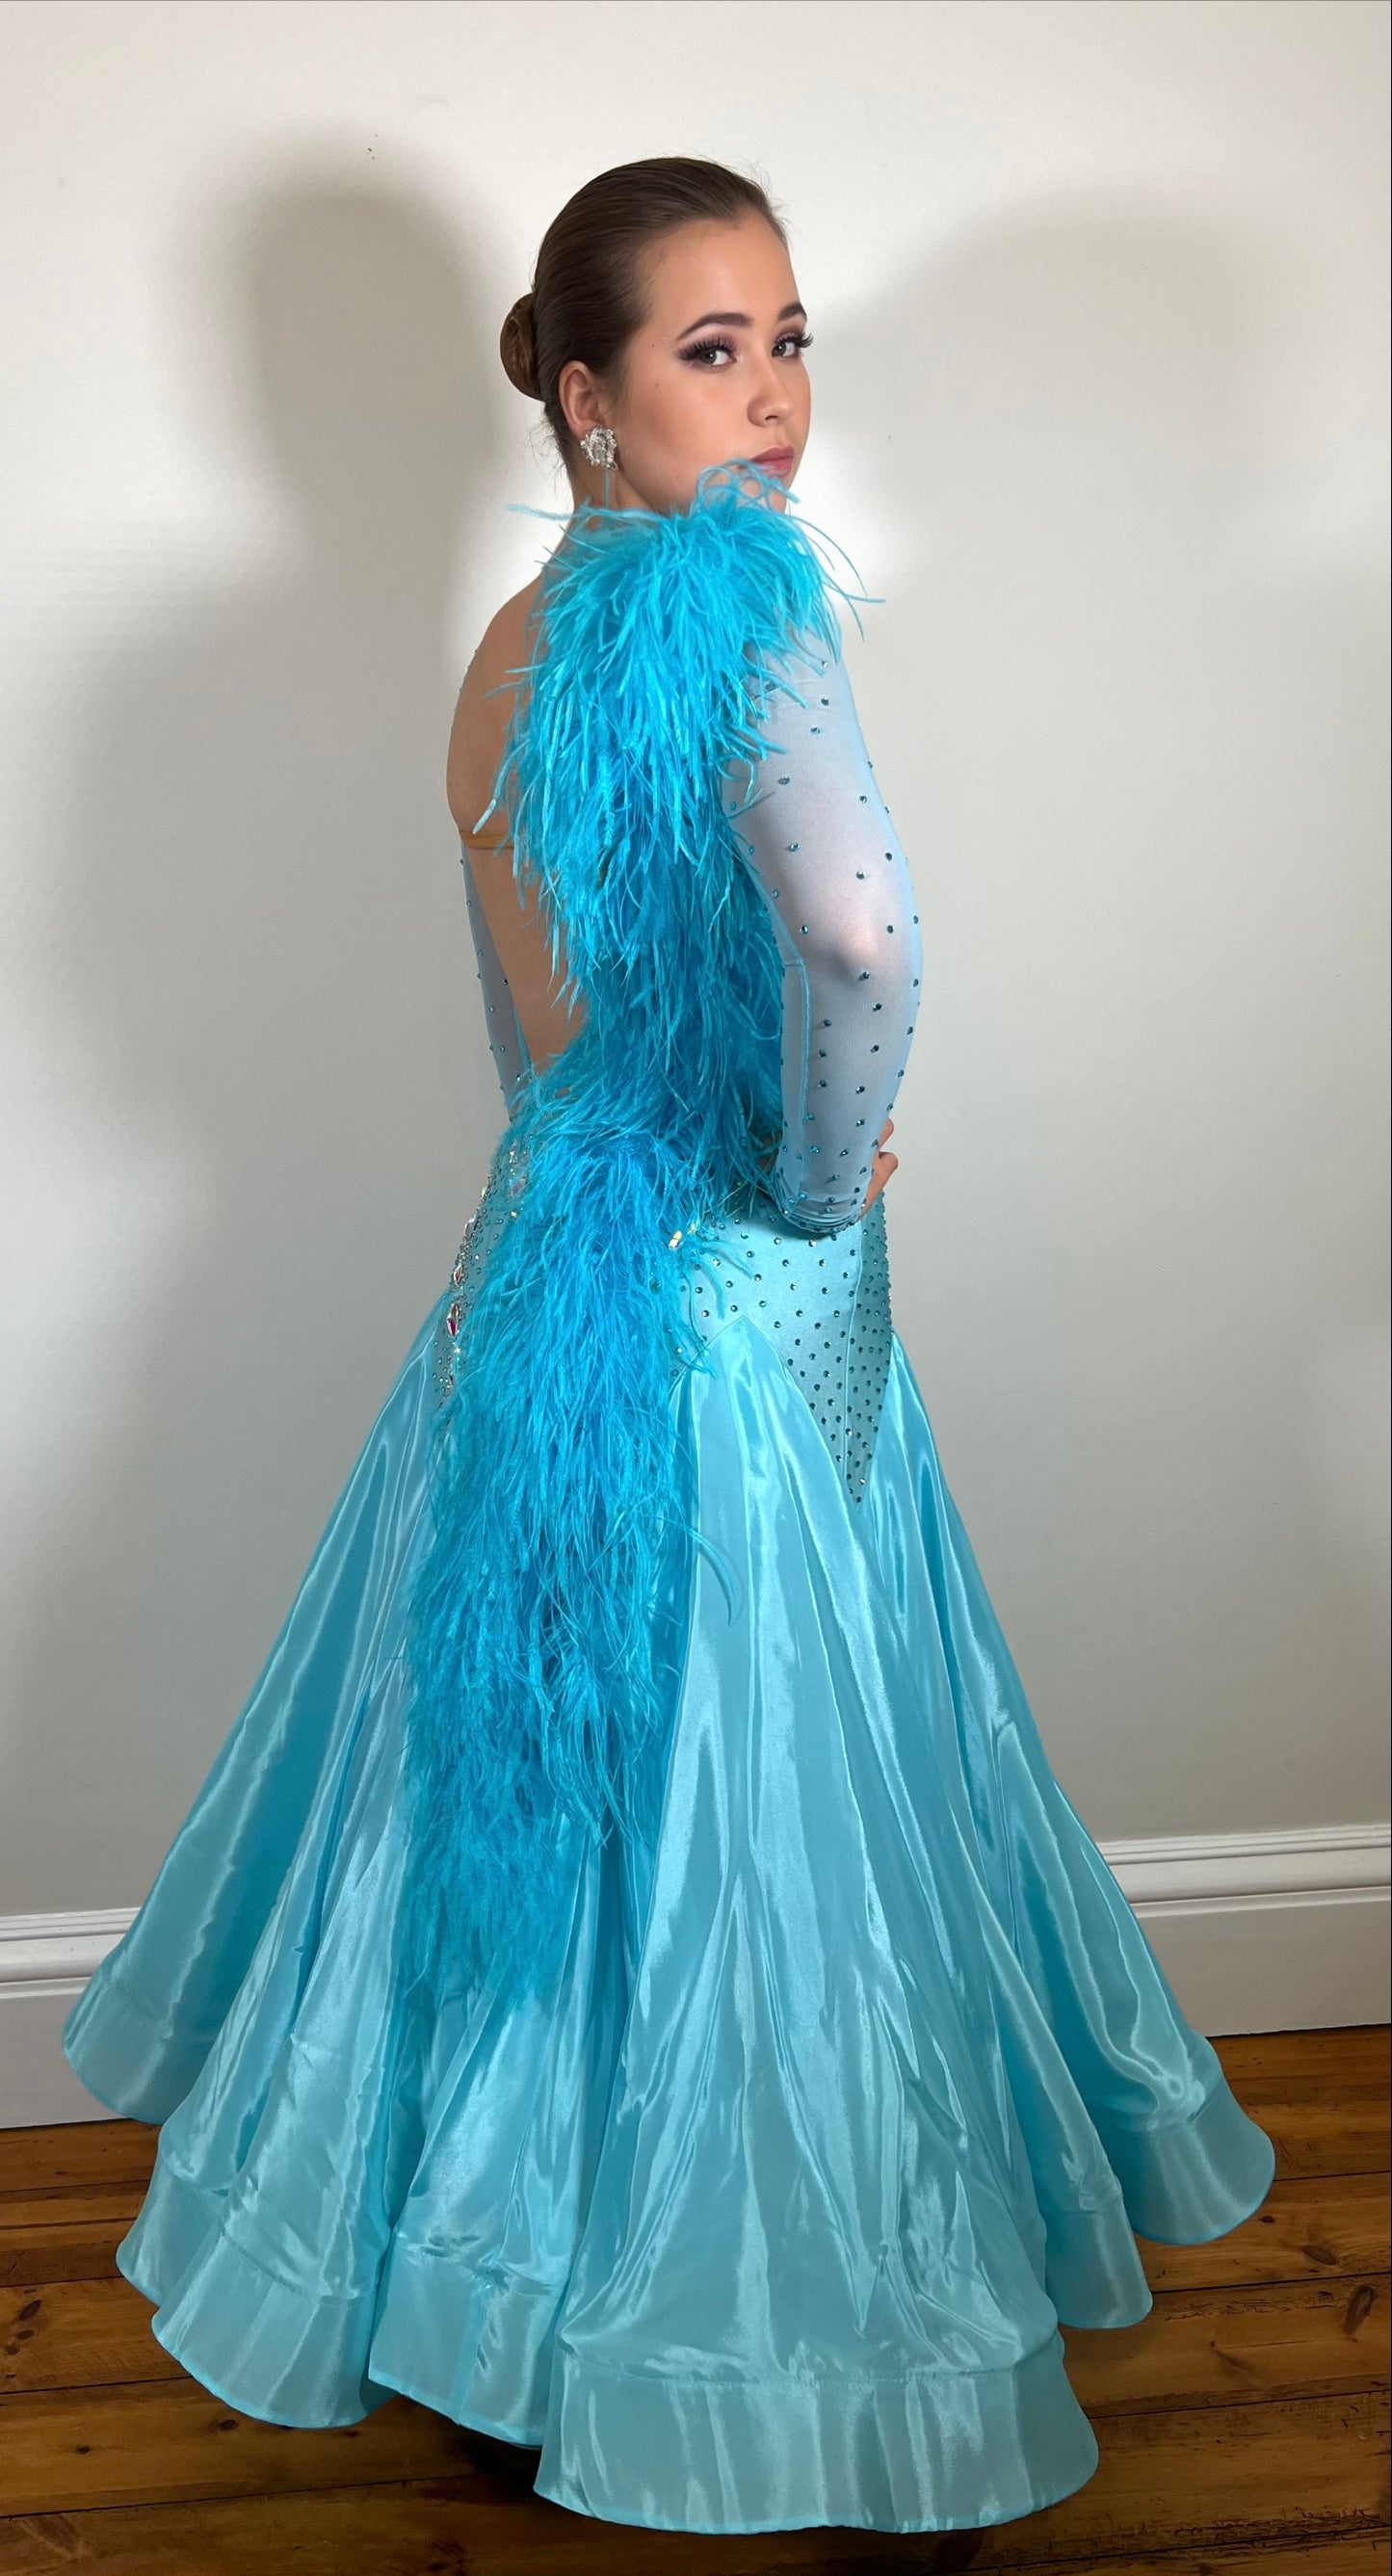 102 Light Paradise Blue Ballroom Dress with Ostrich feather features to the shoulder & back. Stoned in AB with boat neck and low back.